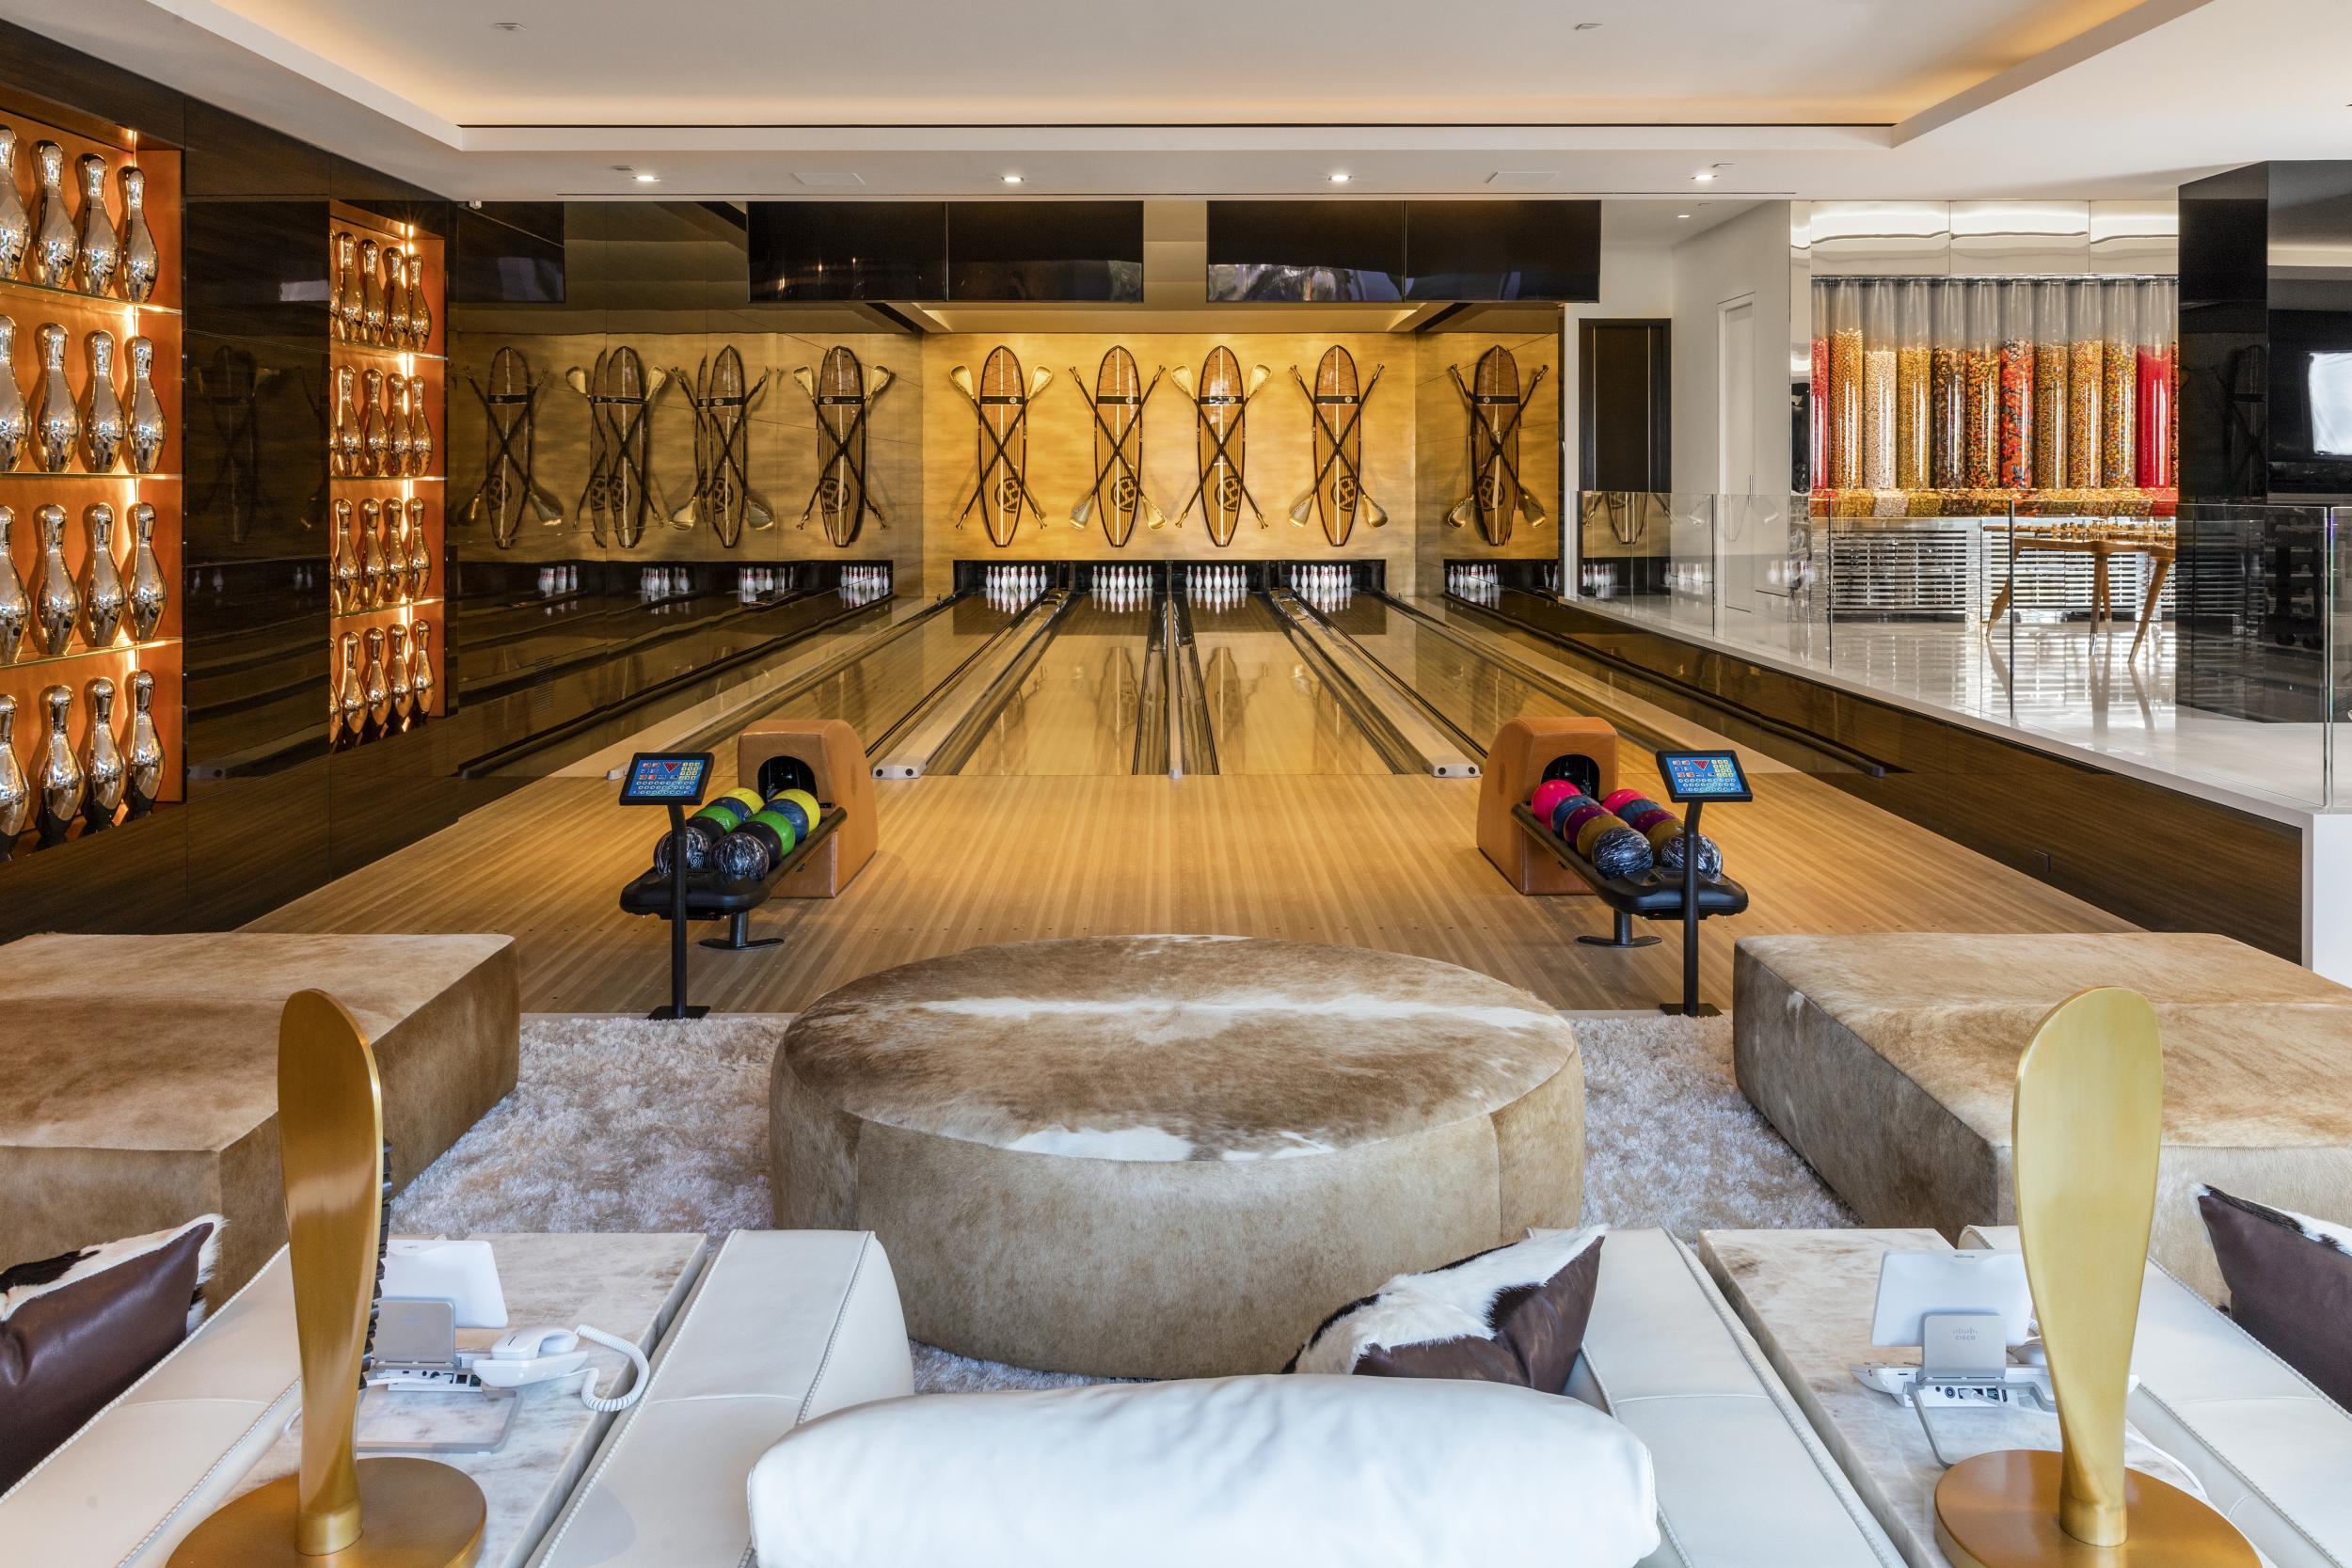 The house includes a bowling alley (Berlyn Photography)